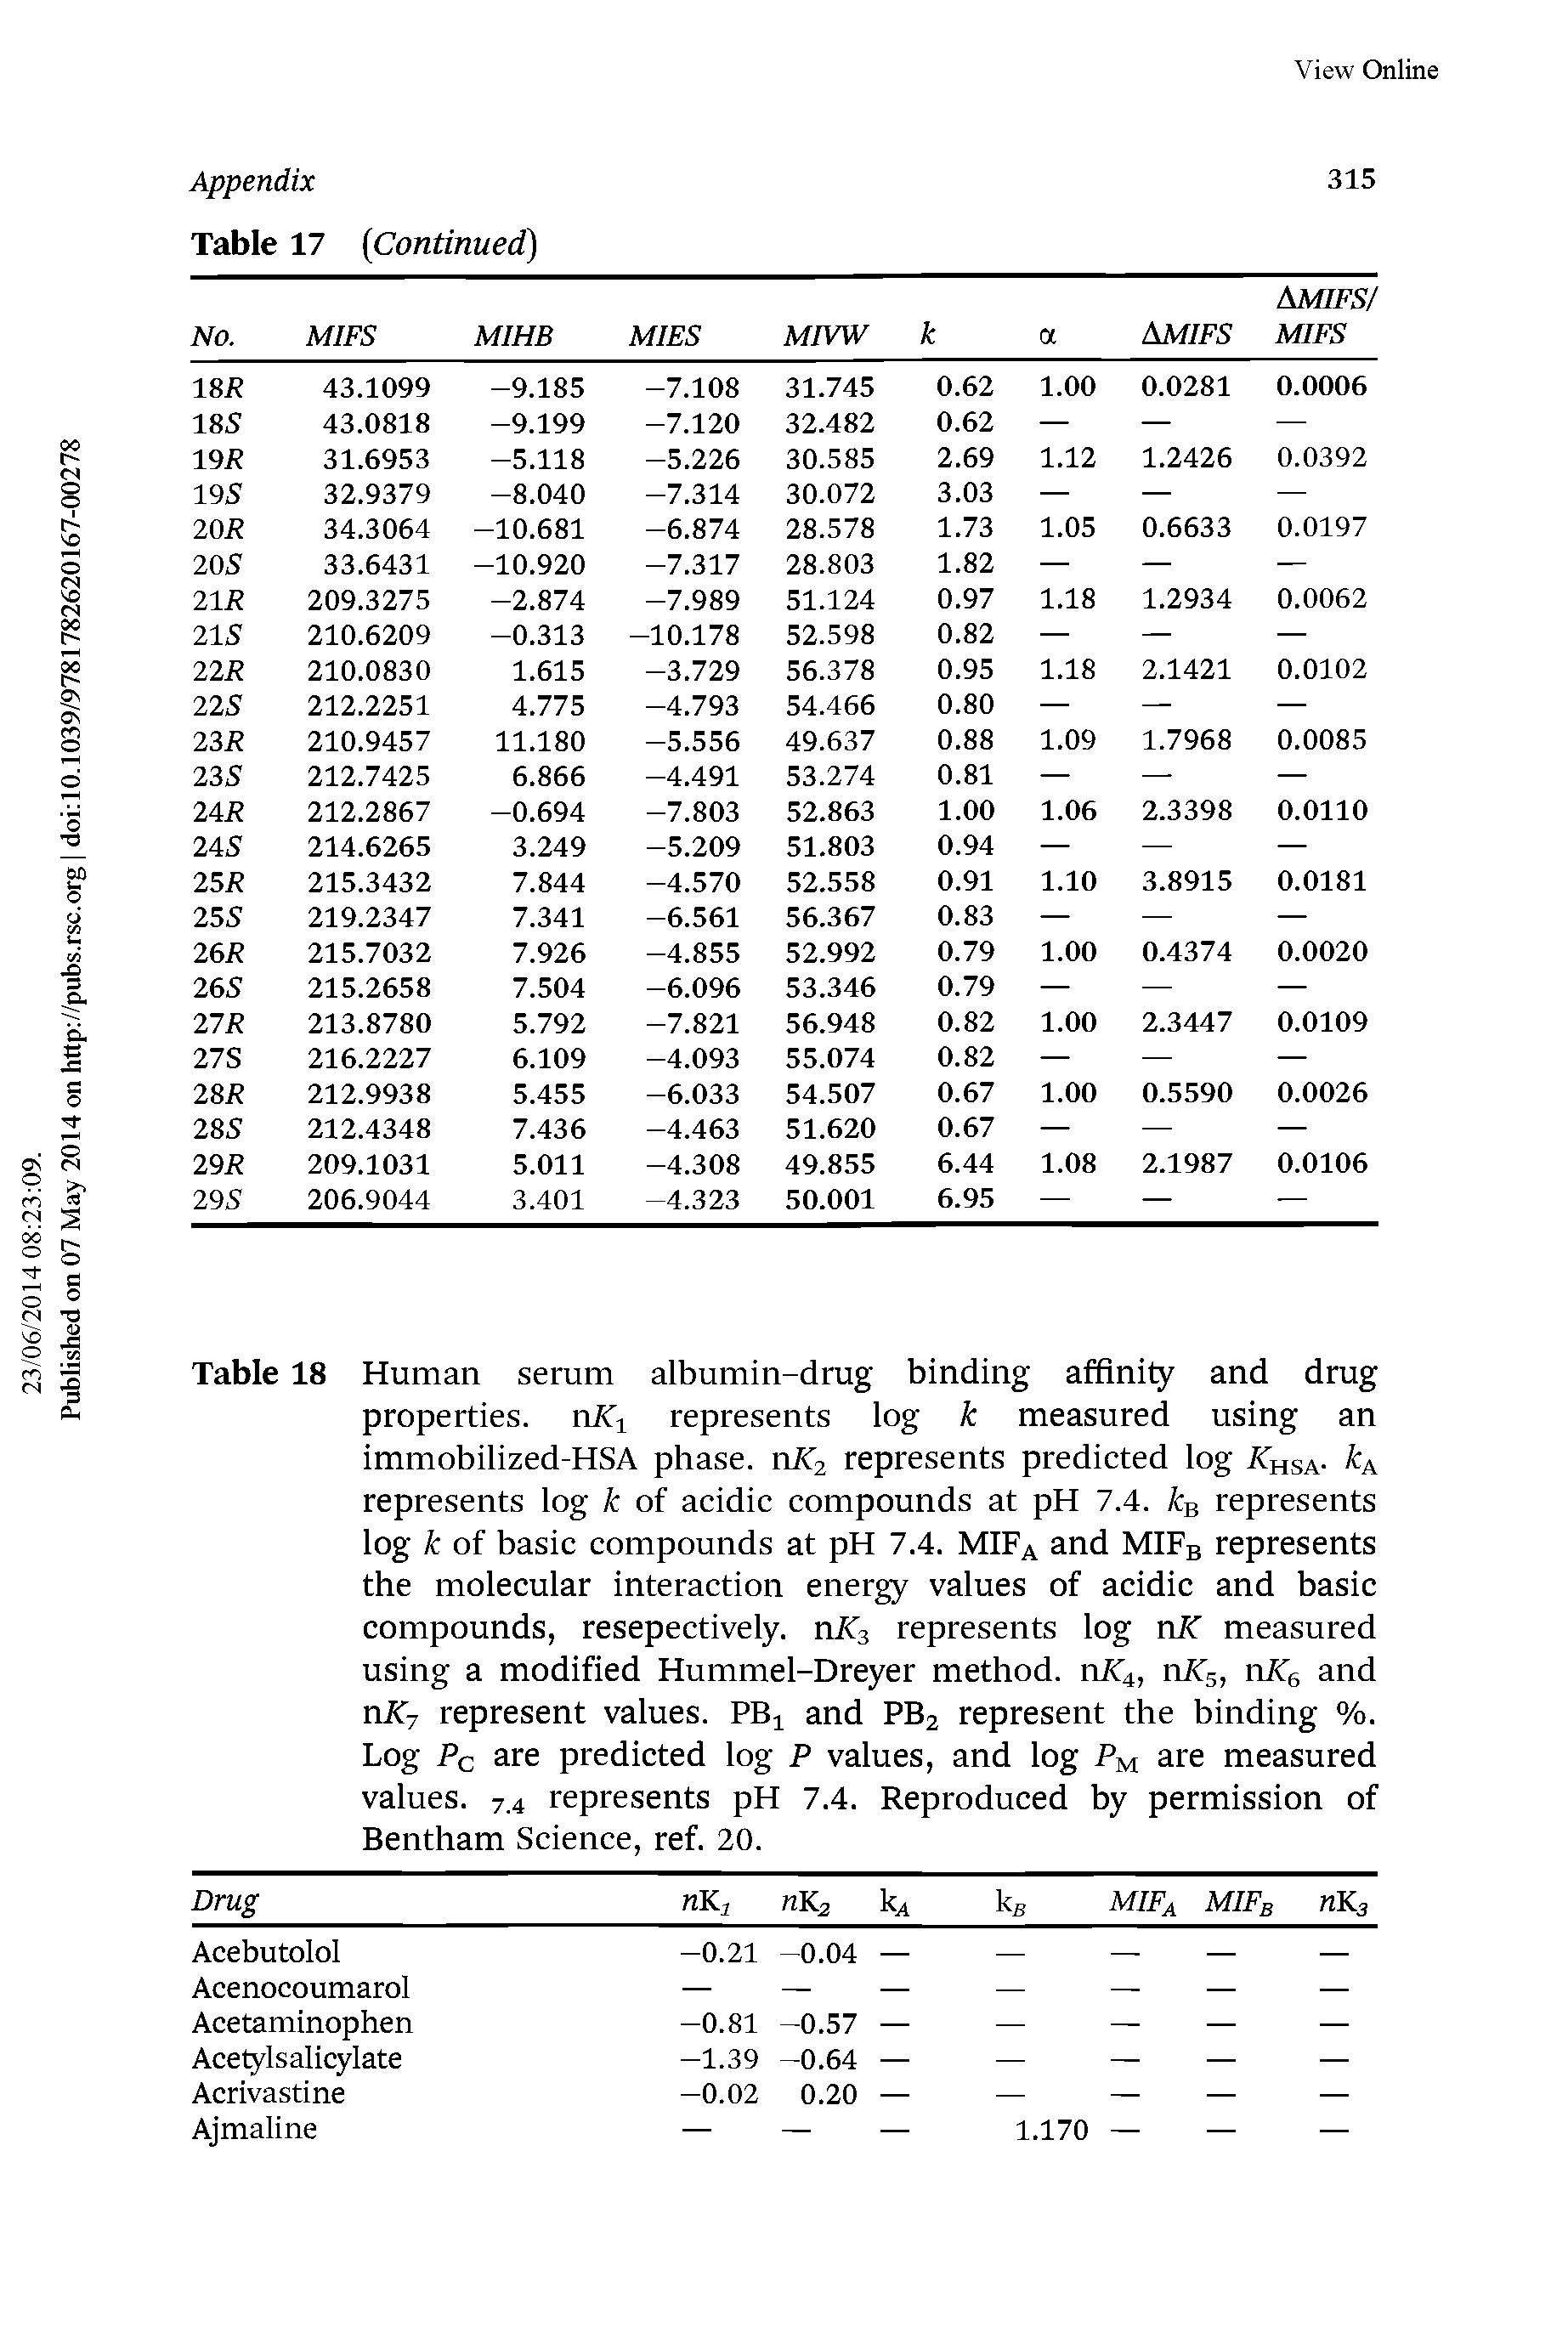 Table 18 Human serum albumin-drug binding affinity and drug properties. rrSTi represents log k measured using an immobilized-HSA phase. nKa represents predicted log hsa-represents log k of acidic compounds at pH 7.4. k represents log k of basic compounds at pH 7.4. MIFa and MIFb represents the molecular interaction energy values of acidic and basic compounds, resepectively. nKs represents log nST measured using a modified Hummel-Dreyer method. nJQ, nKs, nSTg and nKj represent values. PB and PB2 represent the binding %. Log Pc are predicted log P values, and log Pm are measured values. 7.4 represents pH 7.4. Reproduced by permission of Bentham Science, ref. 20.